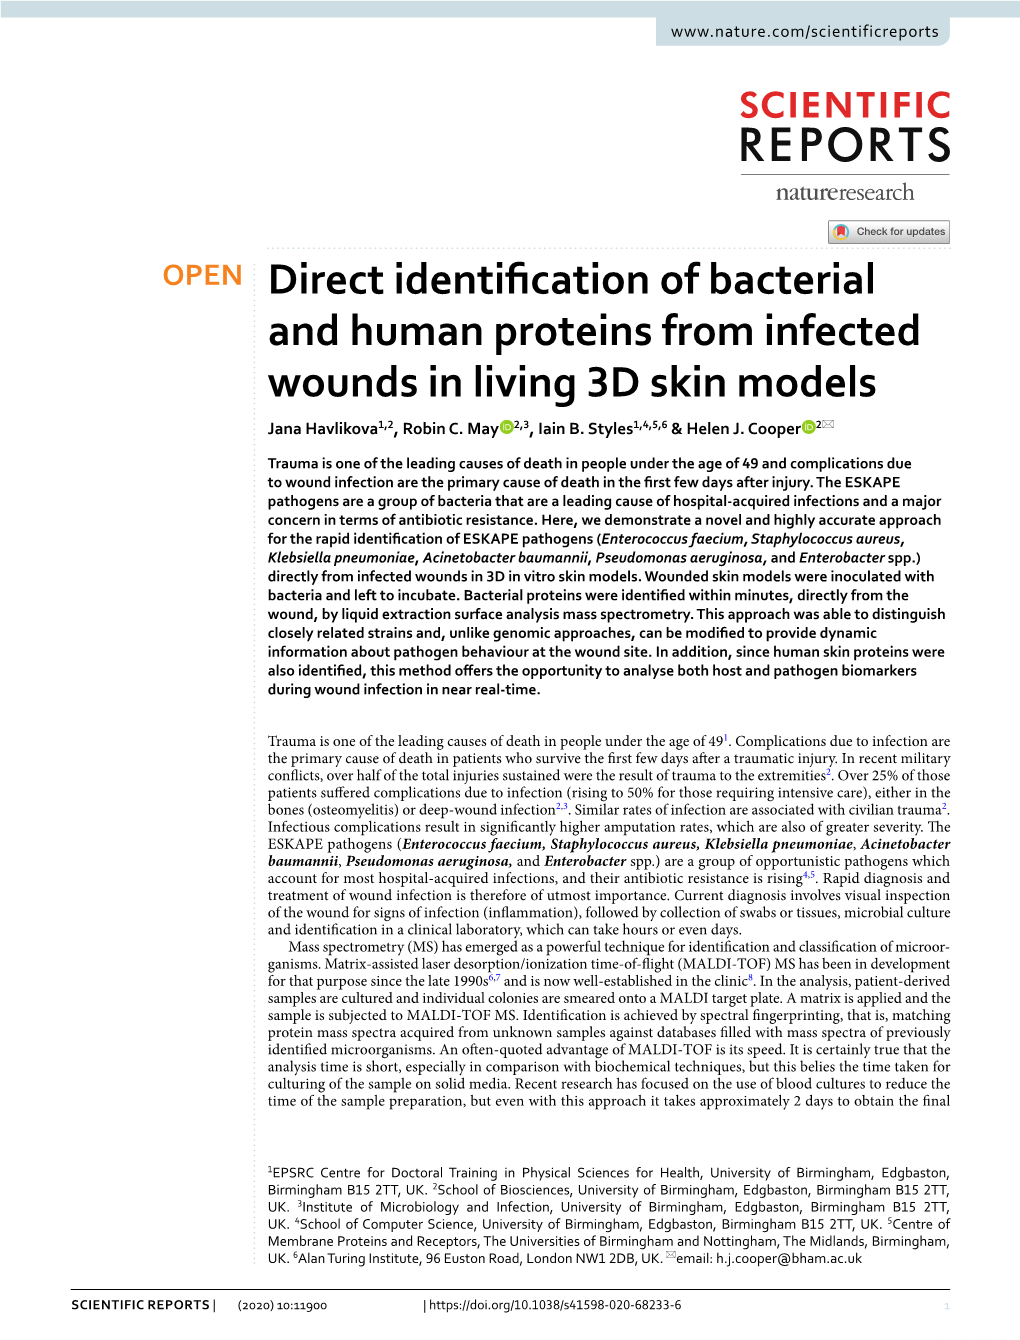 Direct Identification of Bacterial and Human Proteins from Infected Wounds in Living 3D Skin Models